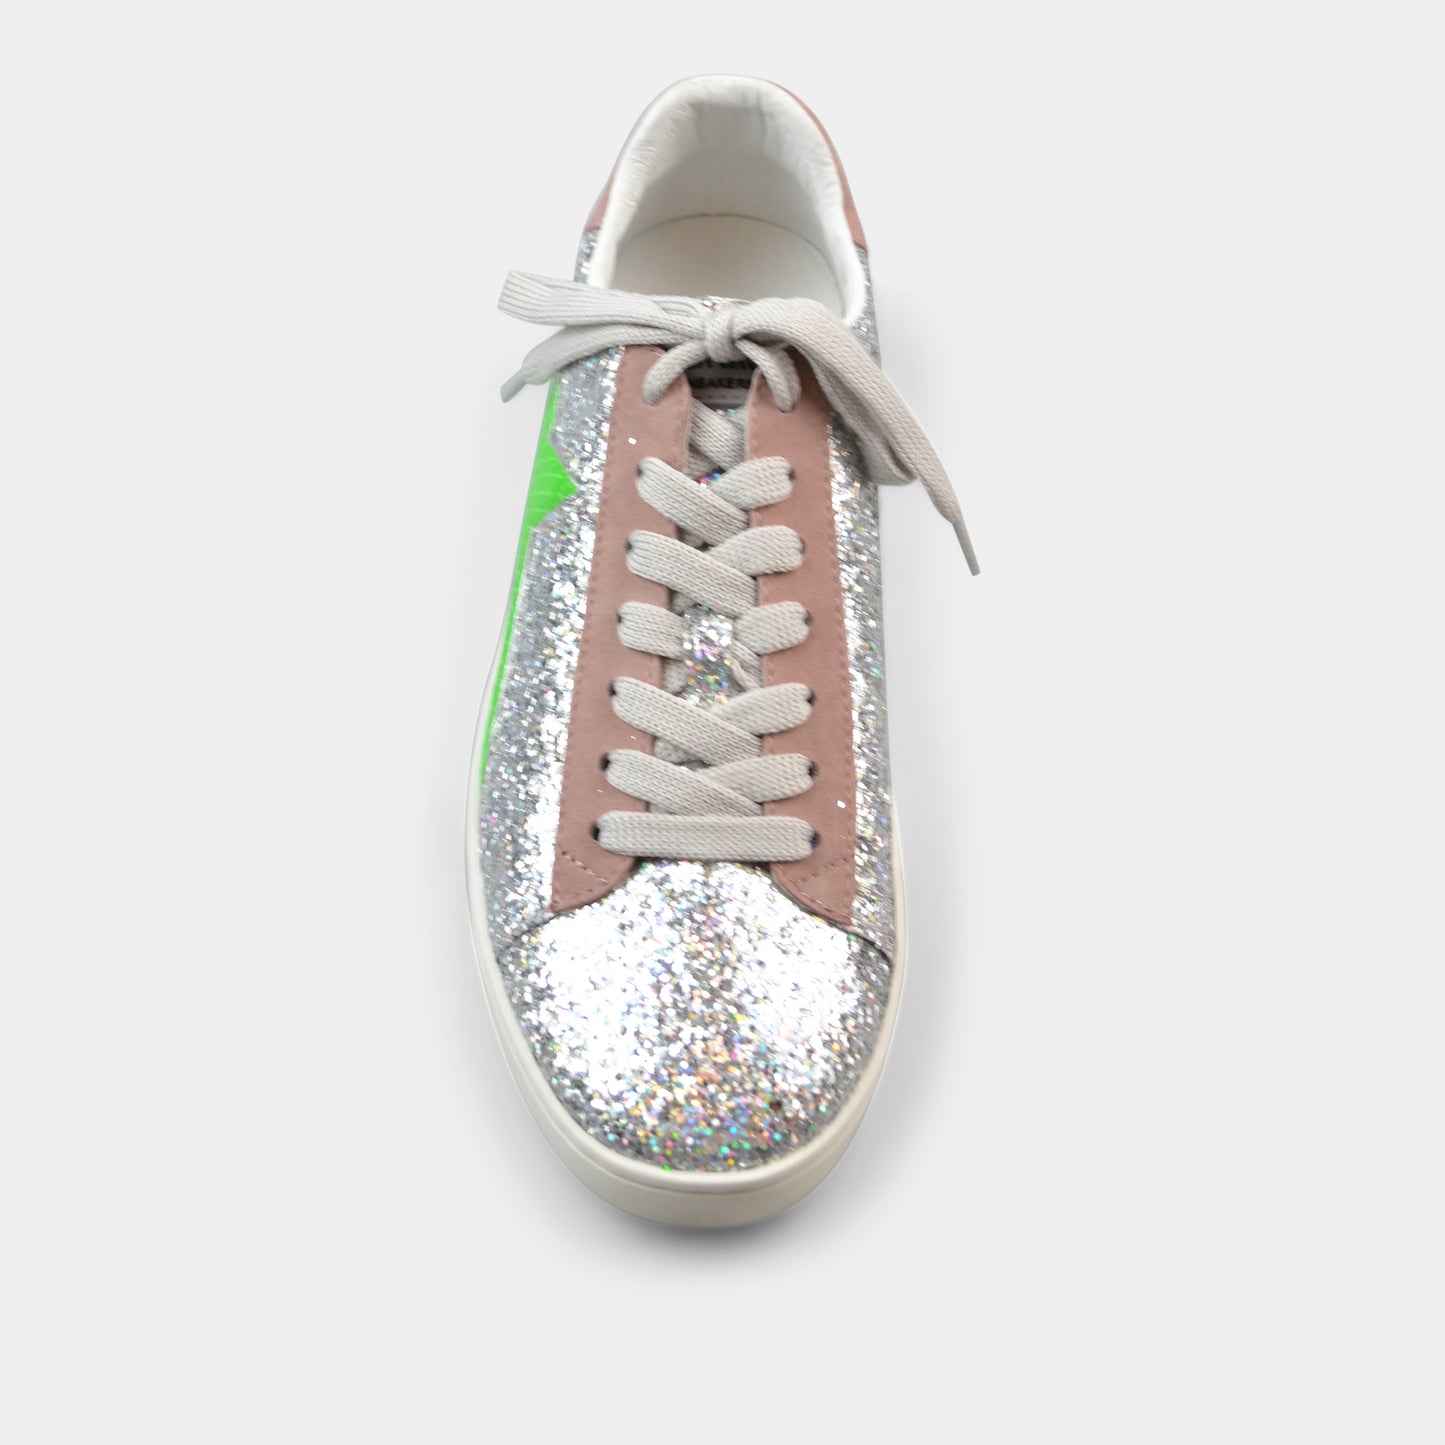 LOLA CRUZ SNEAKER NORMA IN SILVER WITH STAR DETAIL